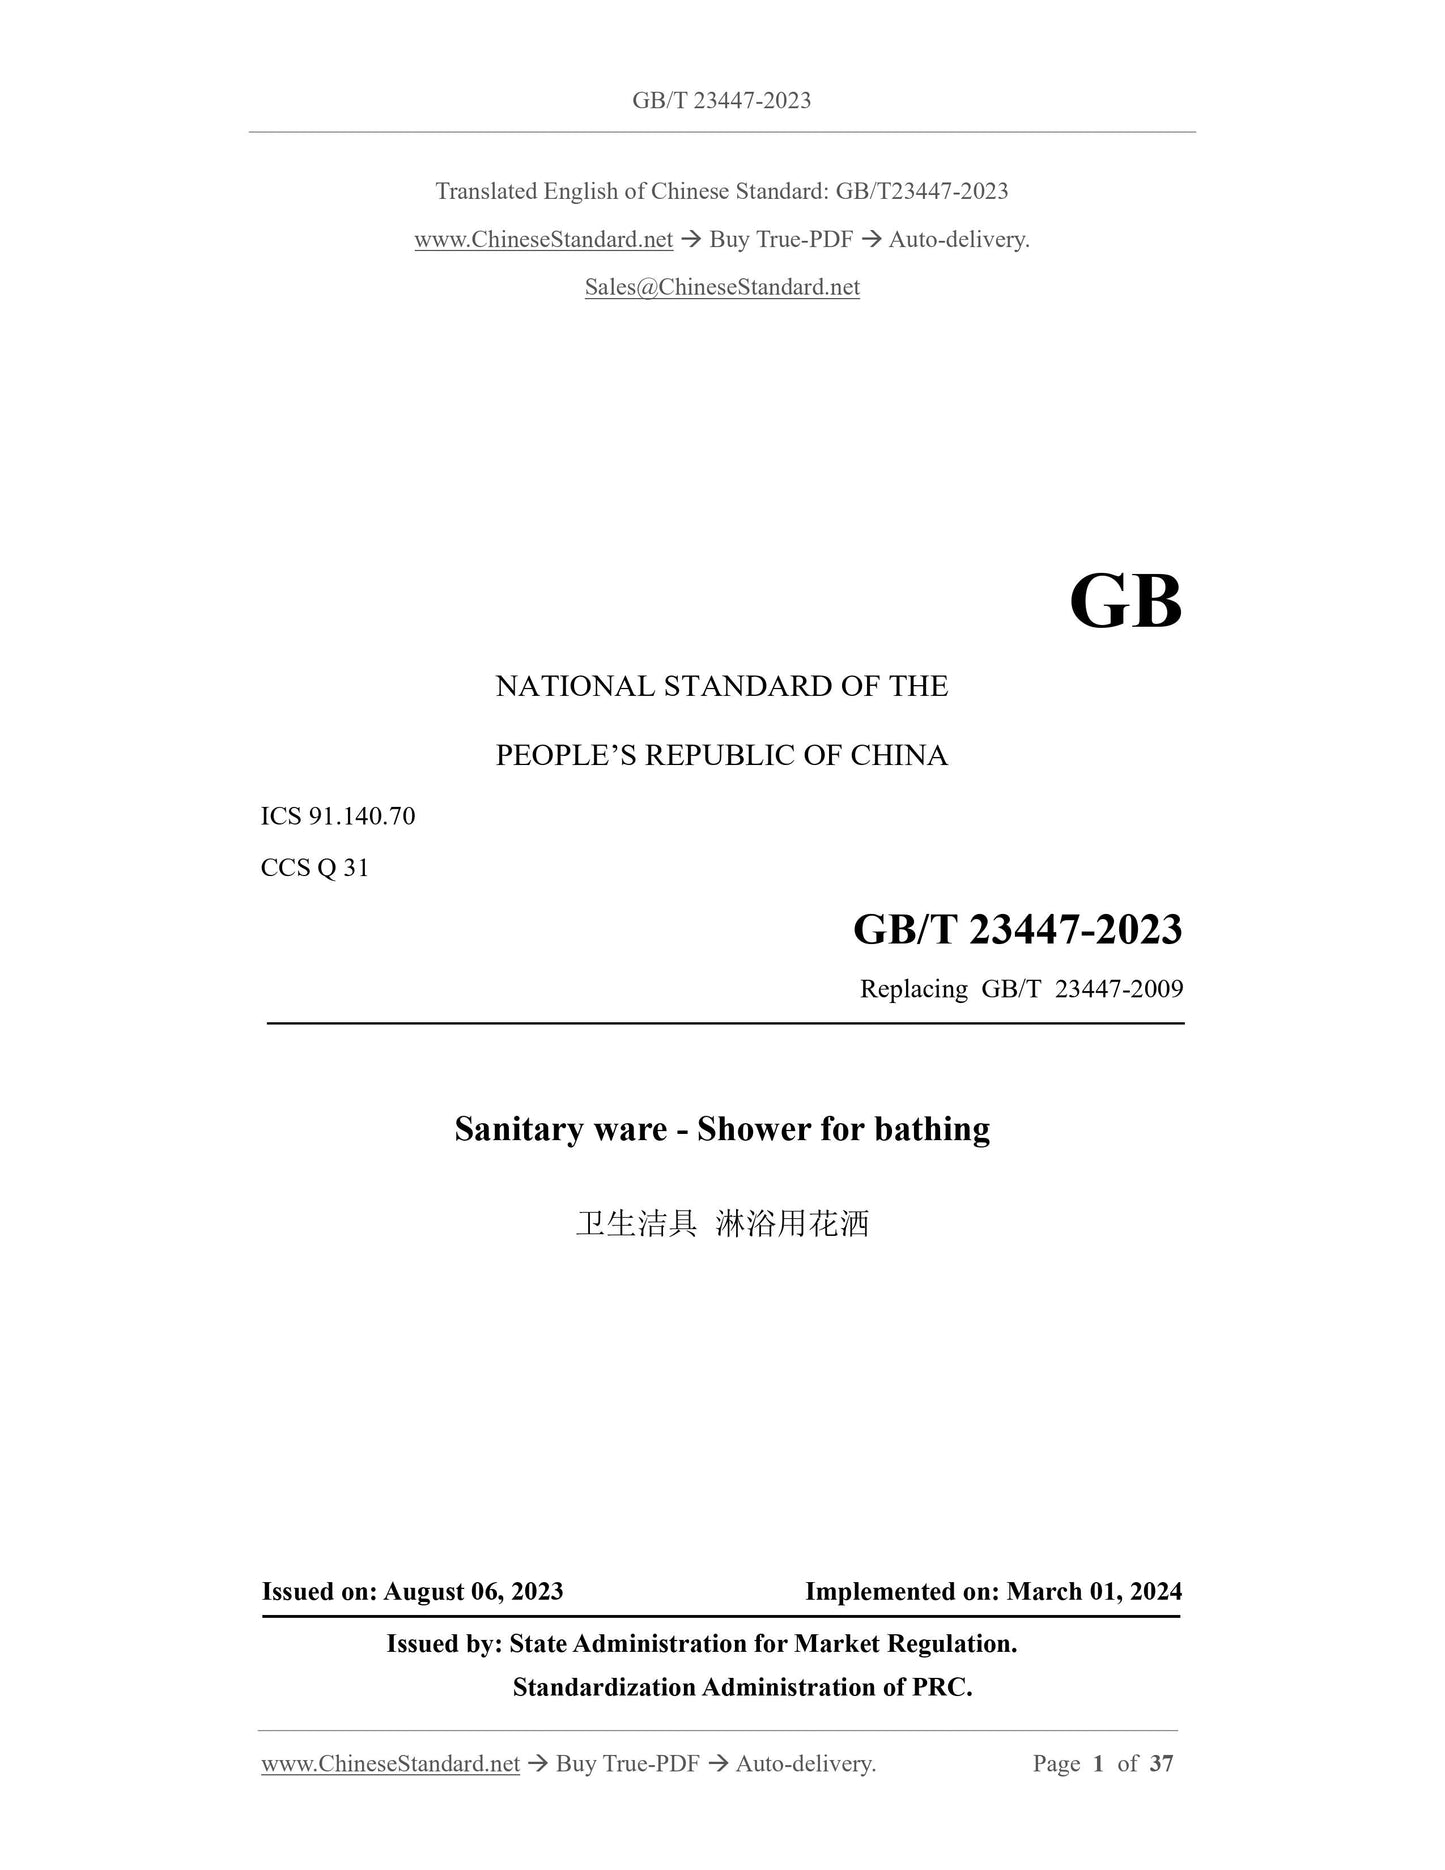 GB/T 23447-2023 Page 1